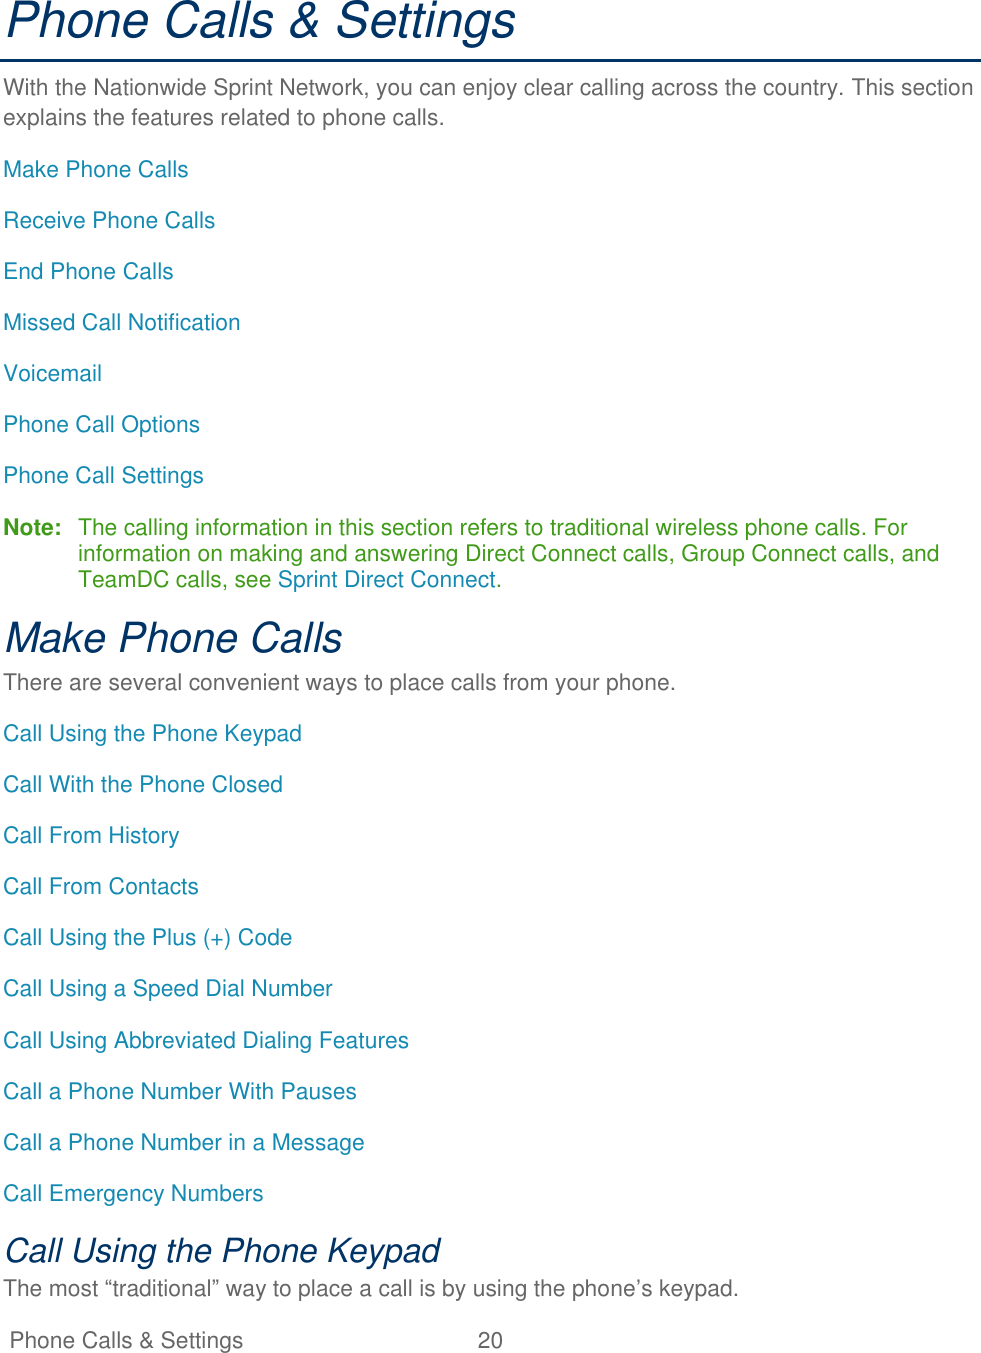   Phone Calls &amp; Settings  20   Phone Calls &amp; Settings With the Nationwide Sprint Network, you can enjoy clear calling across the country. This section explains the features related to phone calls. Make Phone Calls Receive Phone Calls End Phone Calls Missed Call Notification Voicemail Phone Call Options Phone Call Settings Note:  The calling information in this section refers to traditional wireless phone calls. For information on making and answering Direct Connect calls, Group Connect calls, and TeamDC calls, see Sprint Direct Connect. Make Phone Calls There are several convenient ways to place calls from your phone. Call Using the Phone Keypad Call With the Phone Closed Call From History Call From Contacts Call Using the Plus (+) Code Call Using a Speed Dial Number Call Using Abbreviated Dialing Features Call a Phone Number With Pauses Call a Phone Number in a Message Call Emergency Numbers Call Using the Phone Keypad The most ―traditional‖ way to place a call is by using the phone’s keypad. 